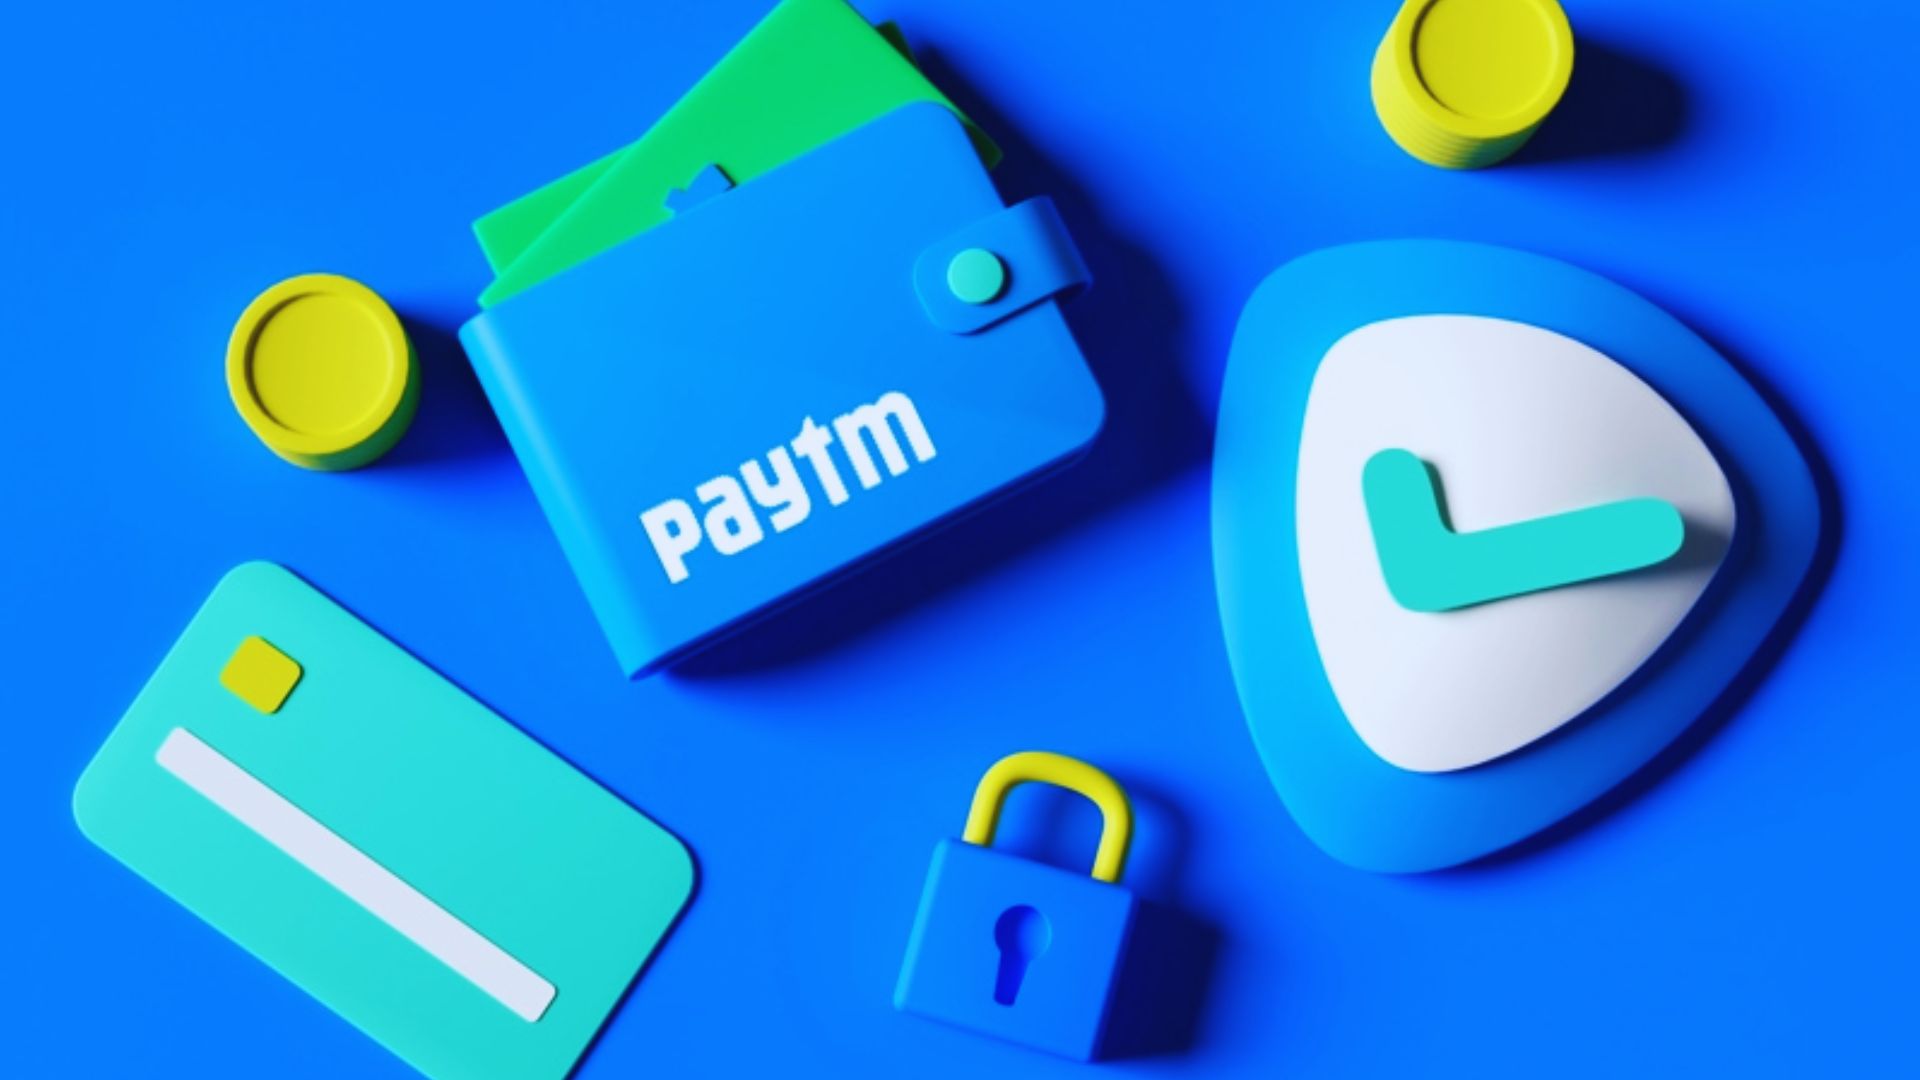 How to Delete Paytm Account? (A Step-By-Step Guide)